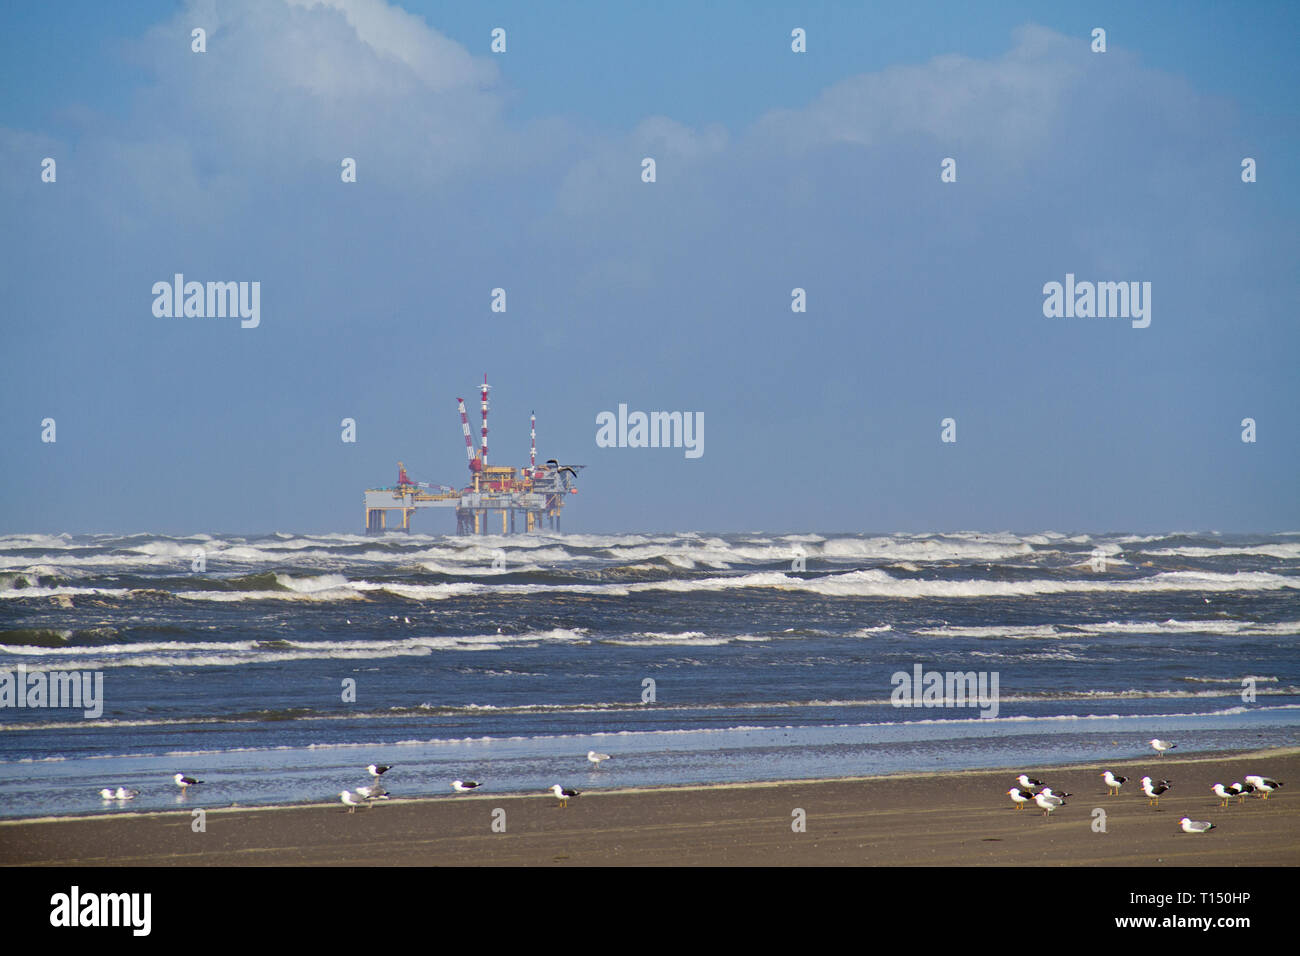 Offshore production platform near the Dutch island Ameland, beach, breaking waves and gulls in the foreground Stock Photo